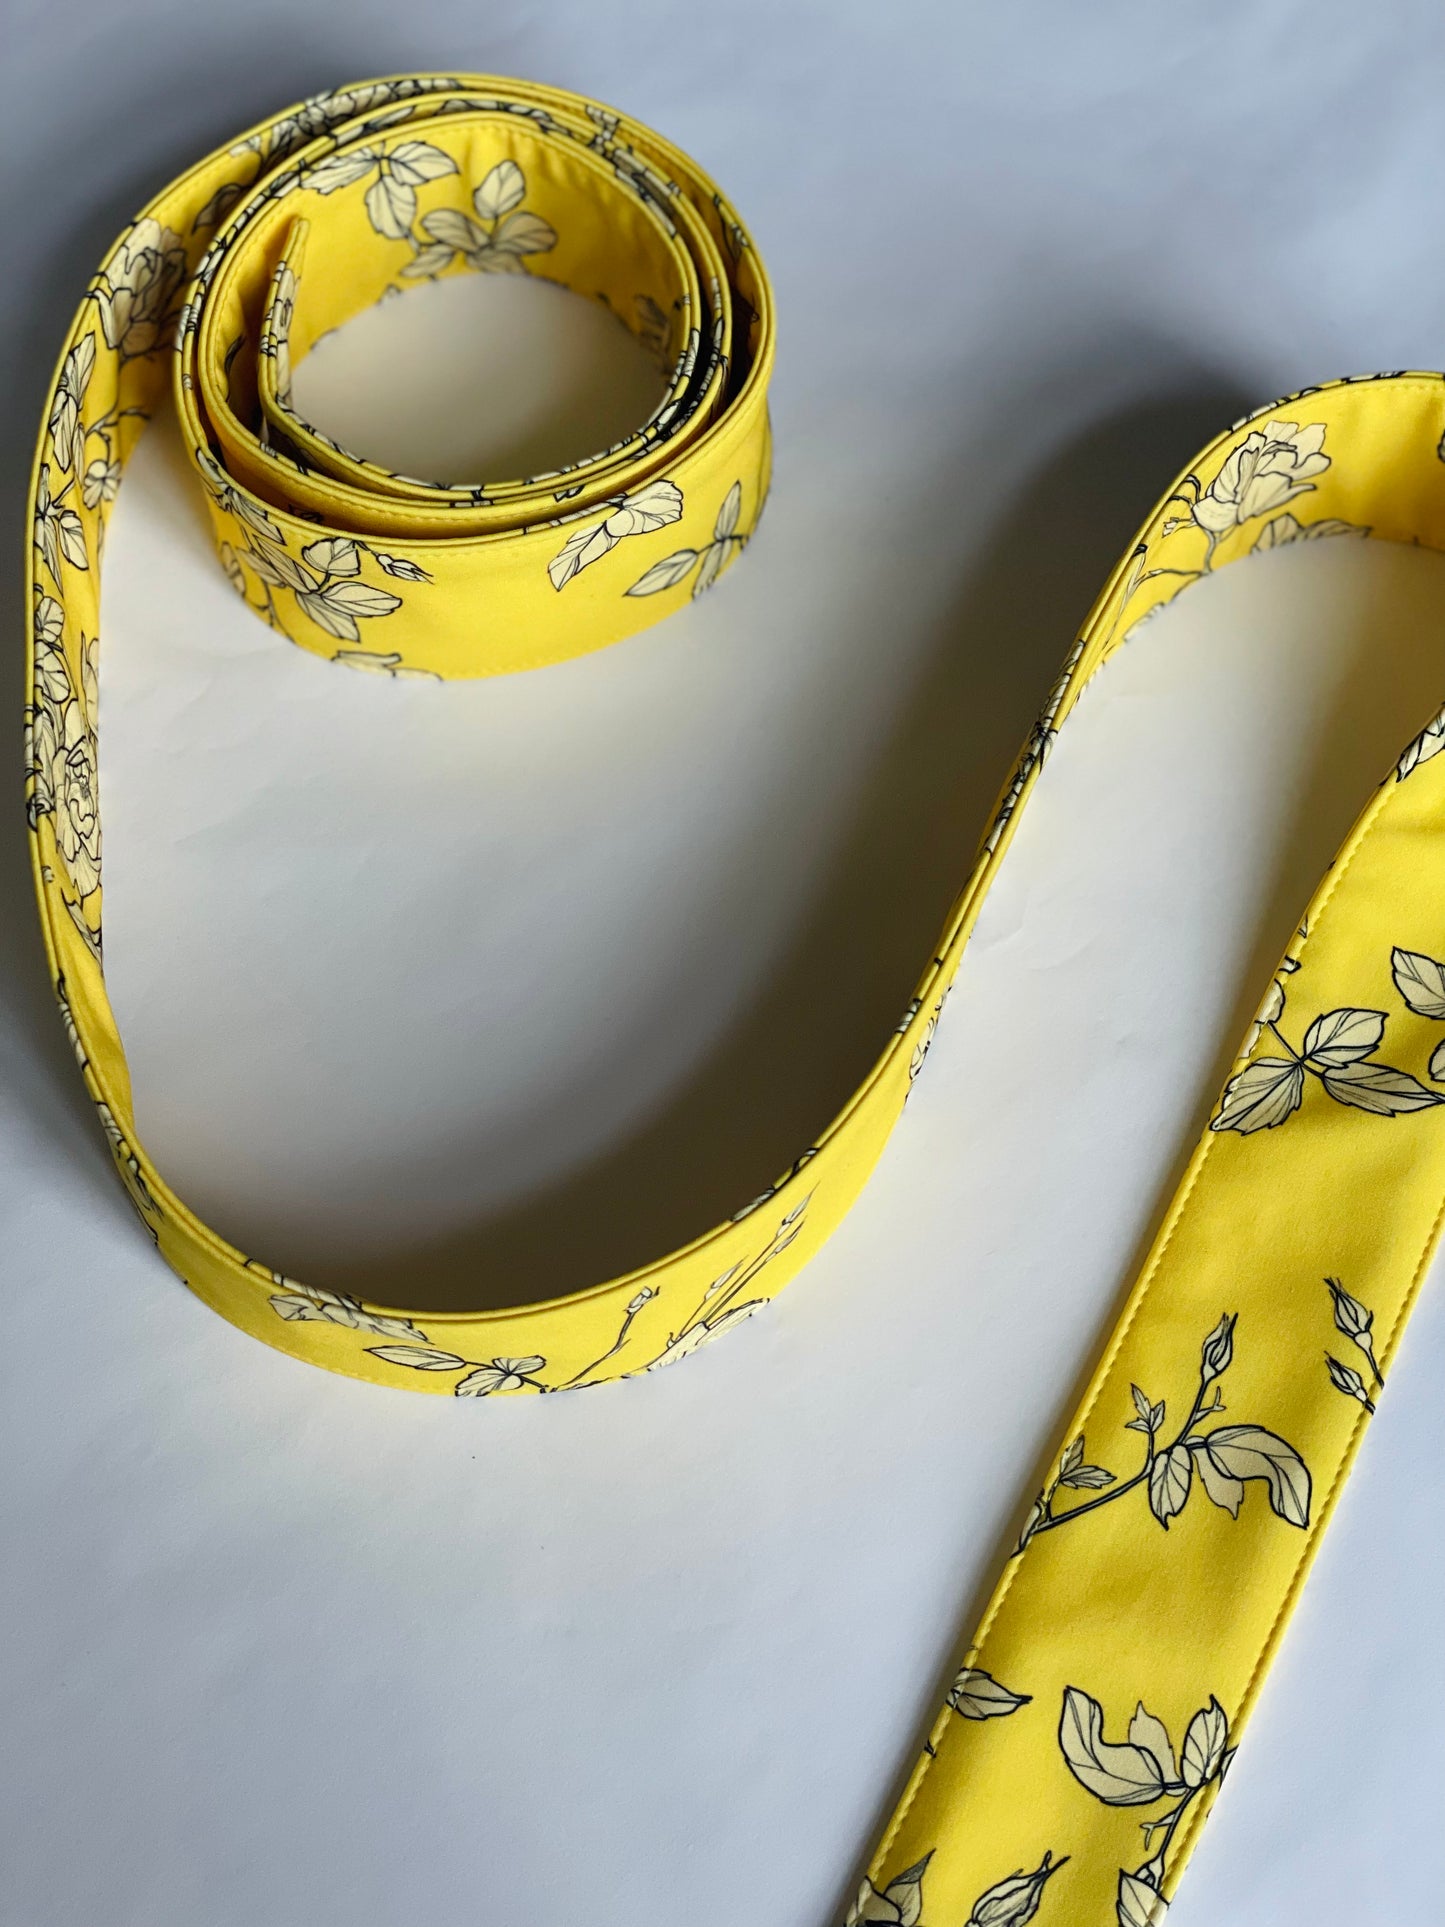 Yellow belt with off-white rose print | Wild Rose